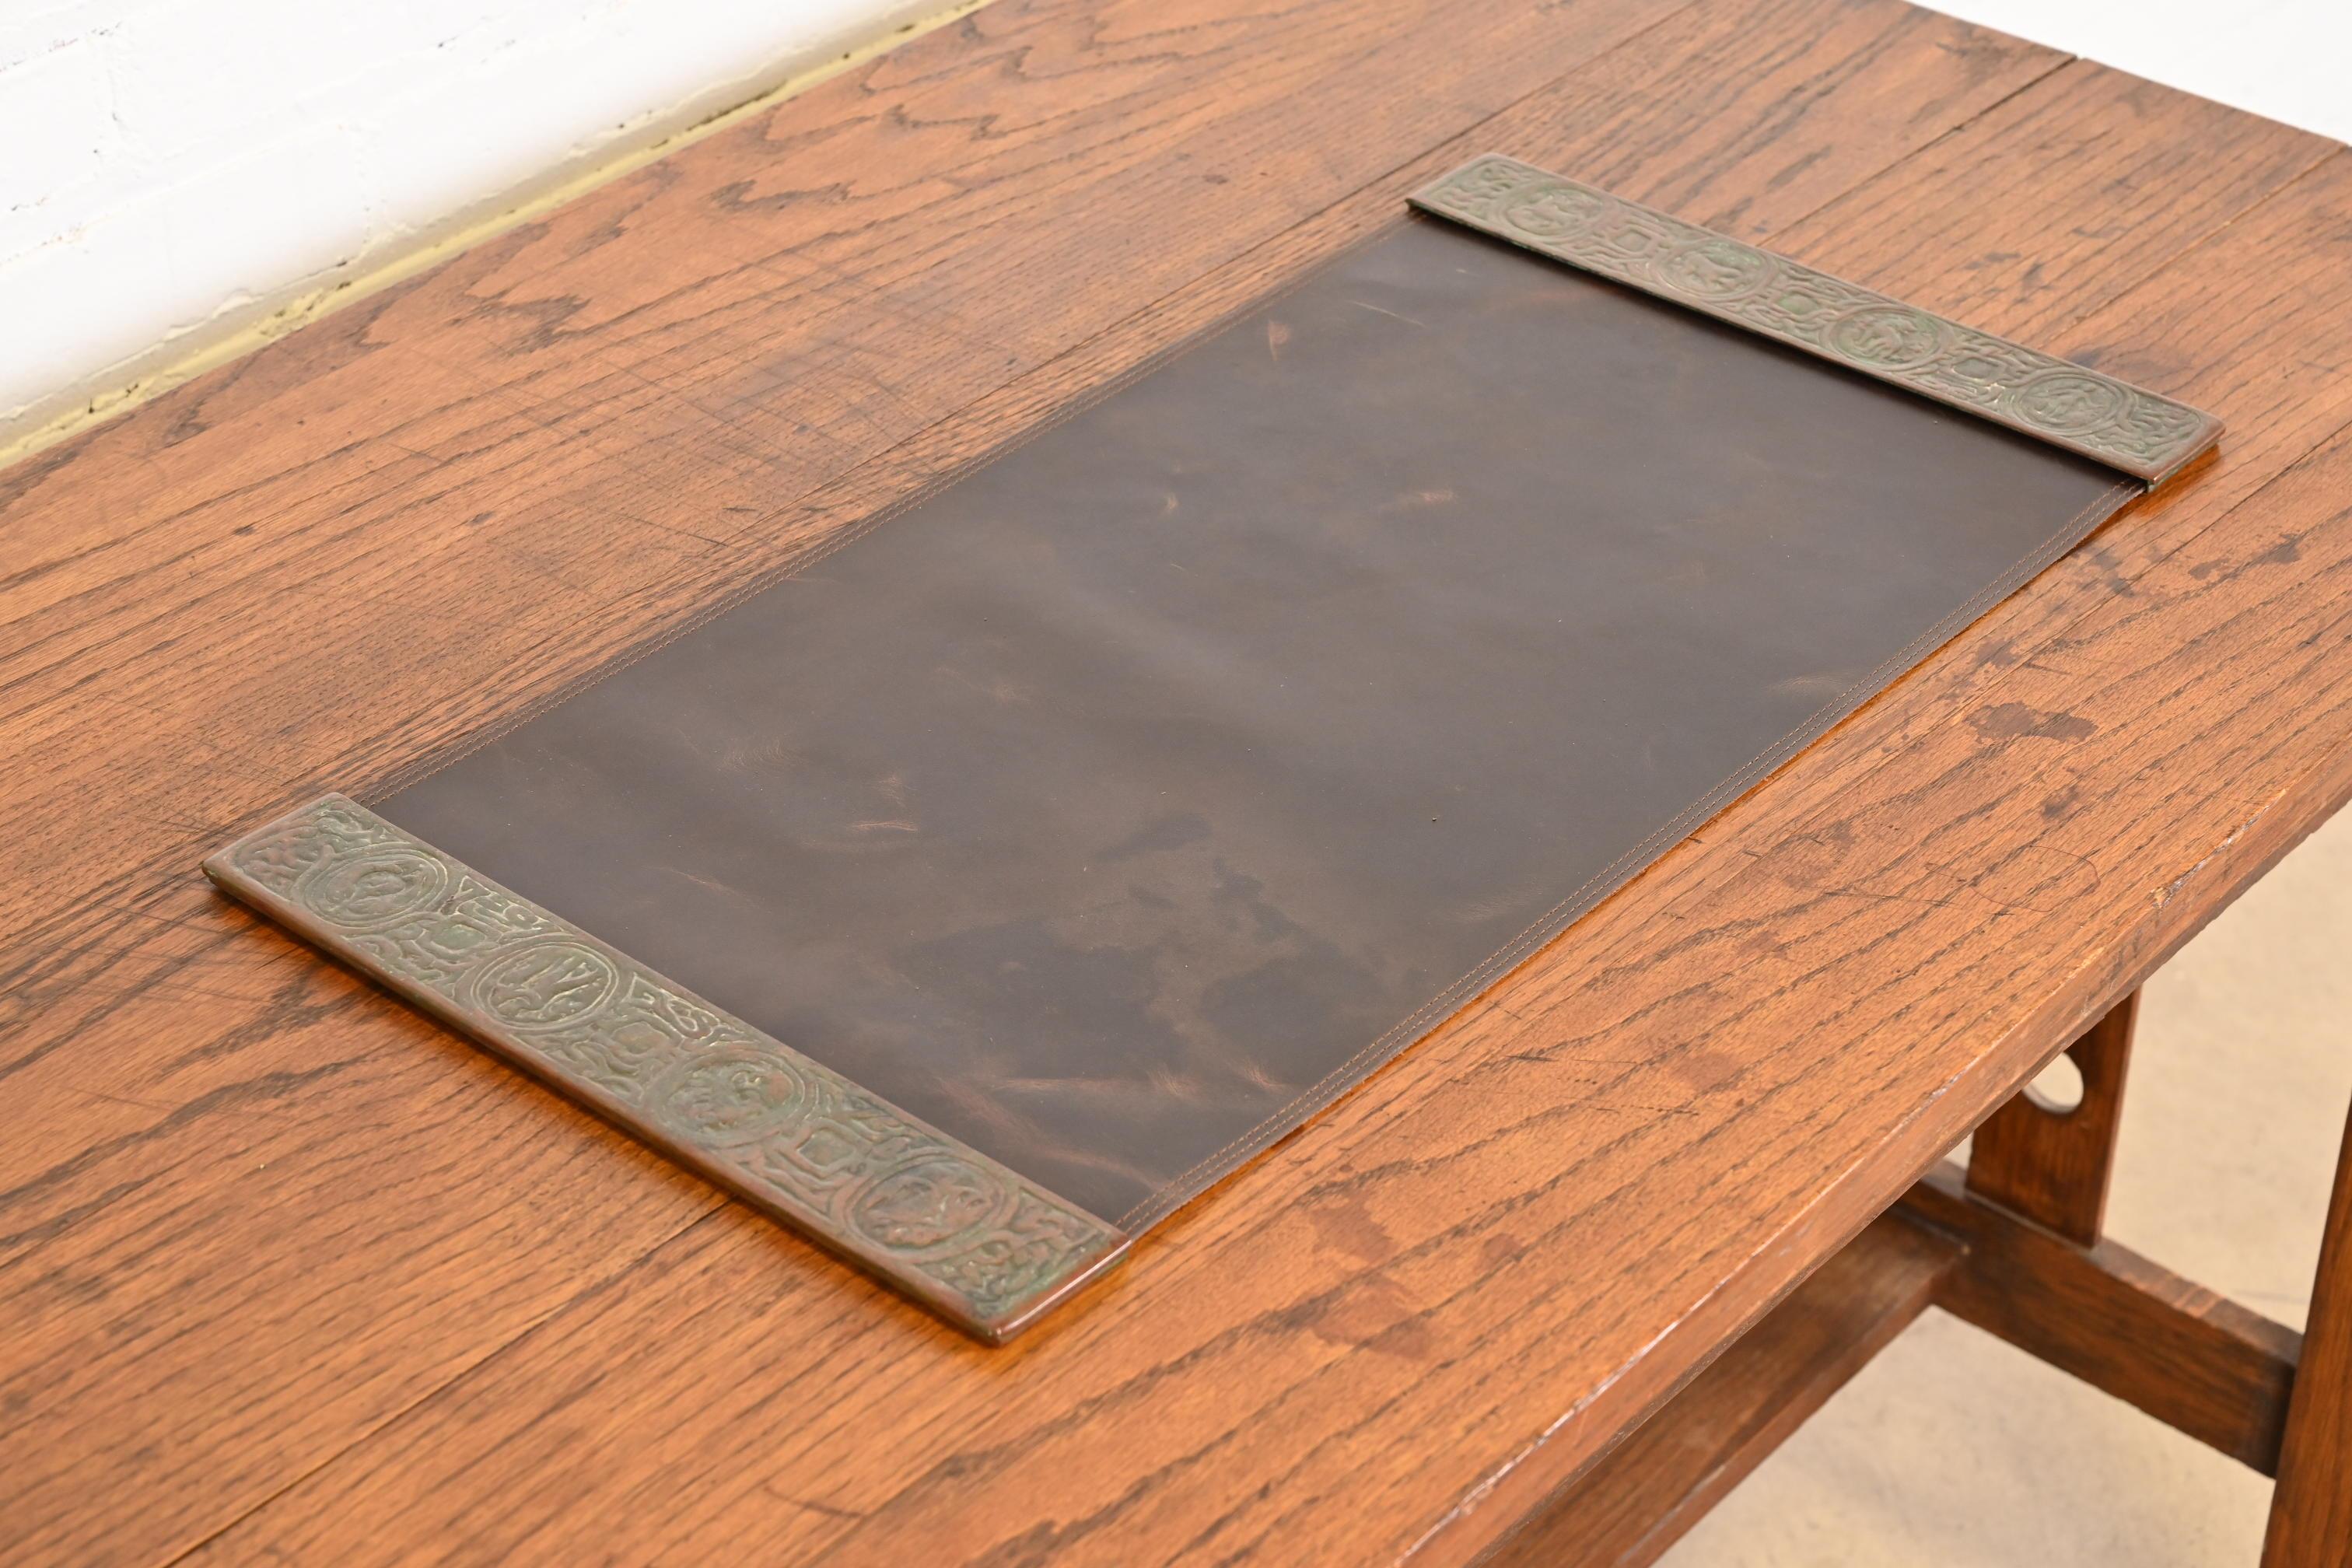 Tiffany Studios New York Zodiac Bronze Blotter Ends With Leather Desk Pad In Good Condition For Sale In South Bend, IN